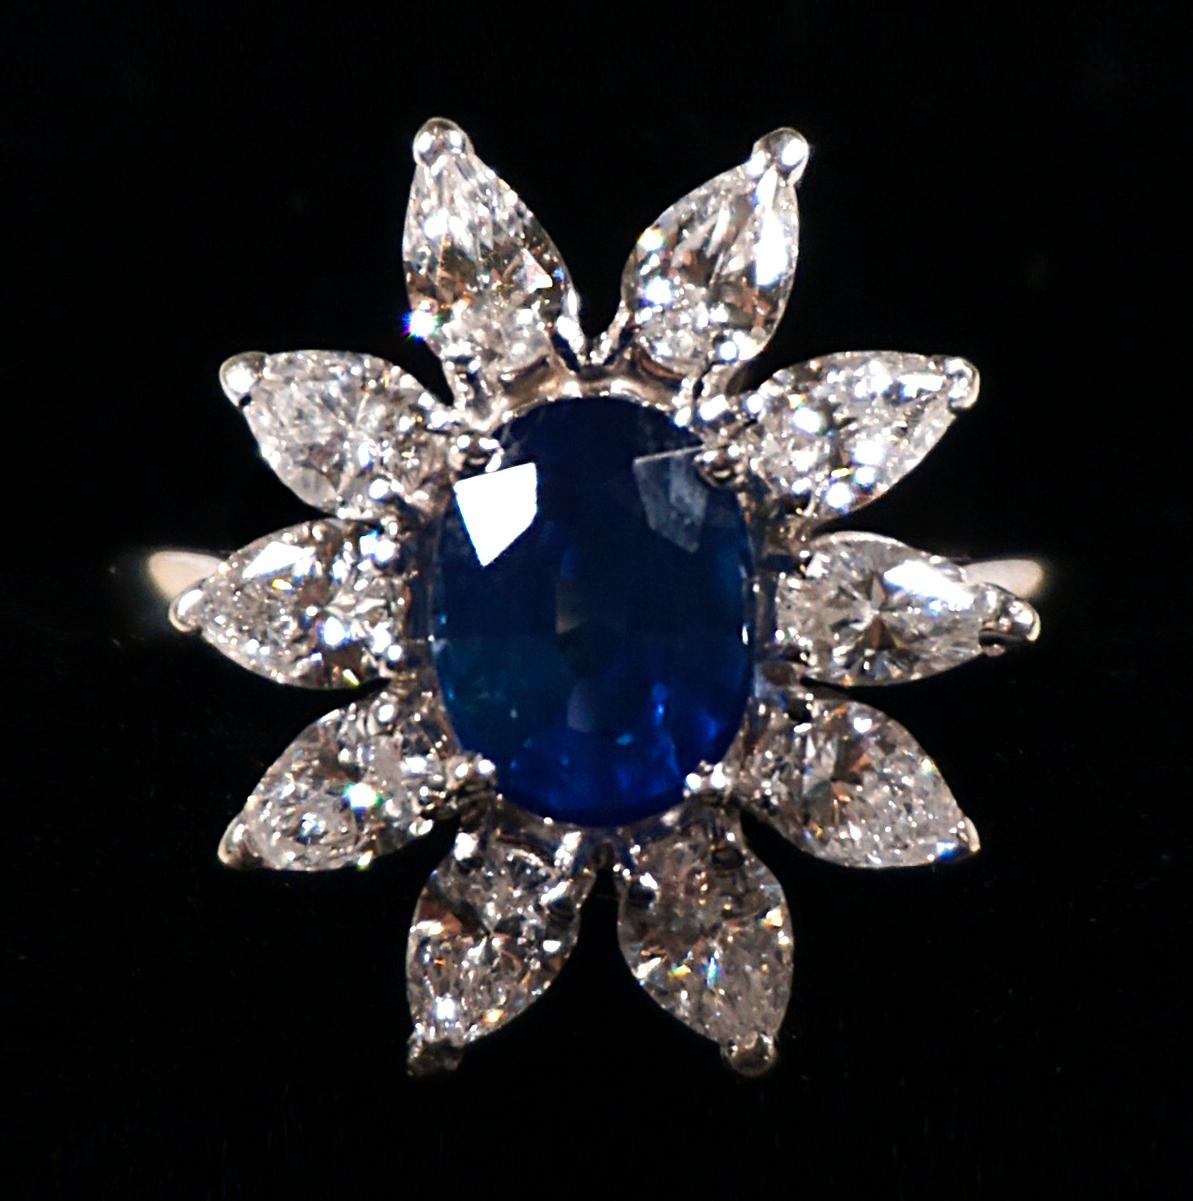 Classic flower-shaped sapphire and brilliant-cut diamonds ring with a centered facetted oval saphire, surounded by 10 drop-shaped cut diamonds estimated to weigh a total of 1.8 carat, claw set in a 18k white gold mount.
 
Circa 1970

head measuring 